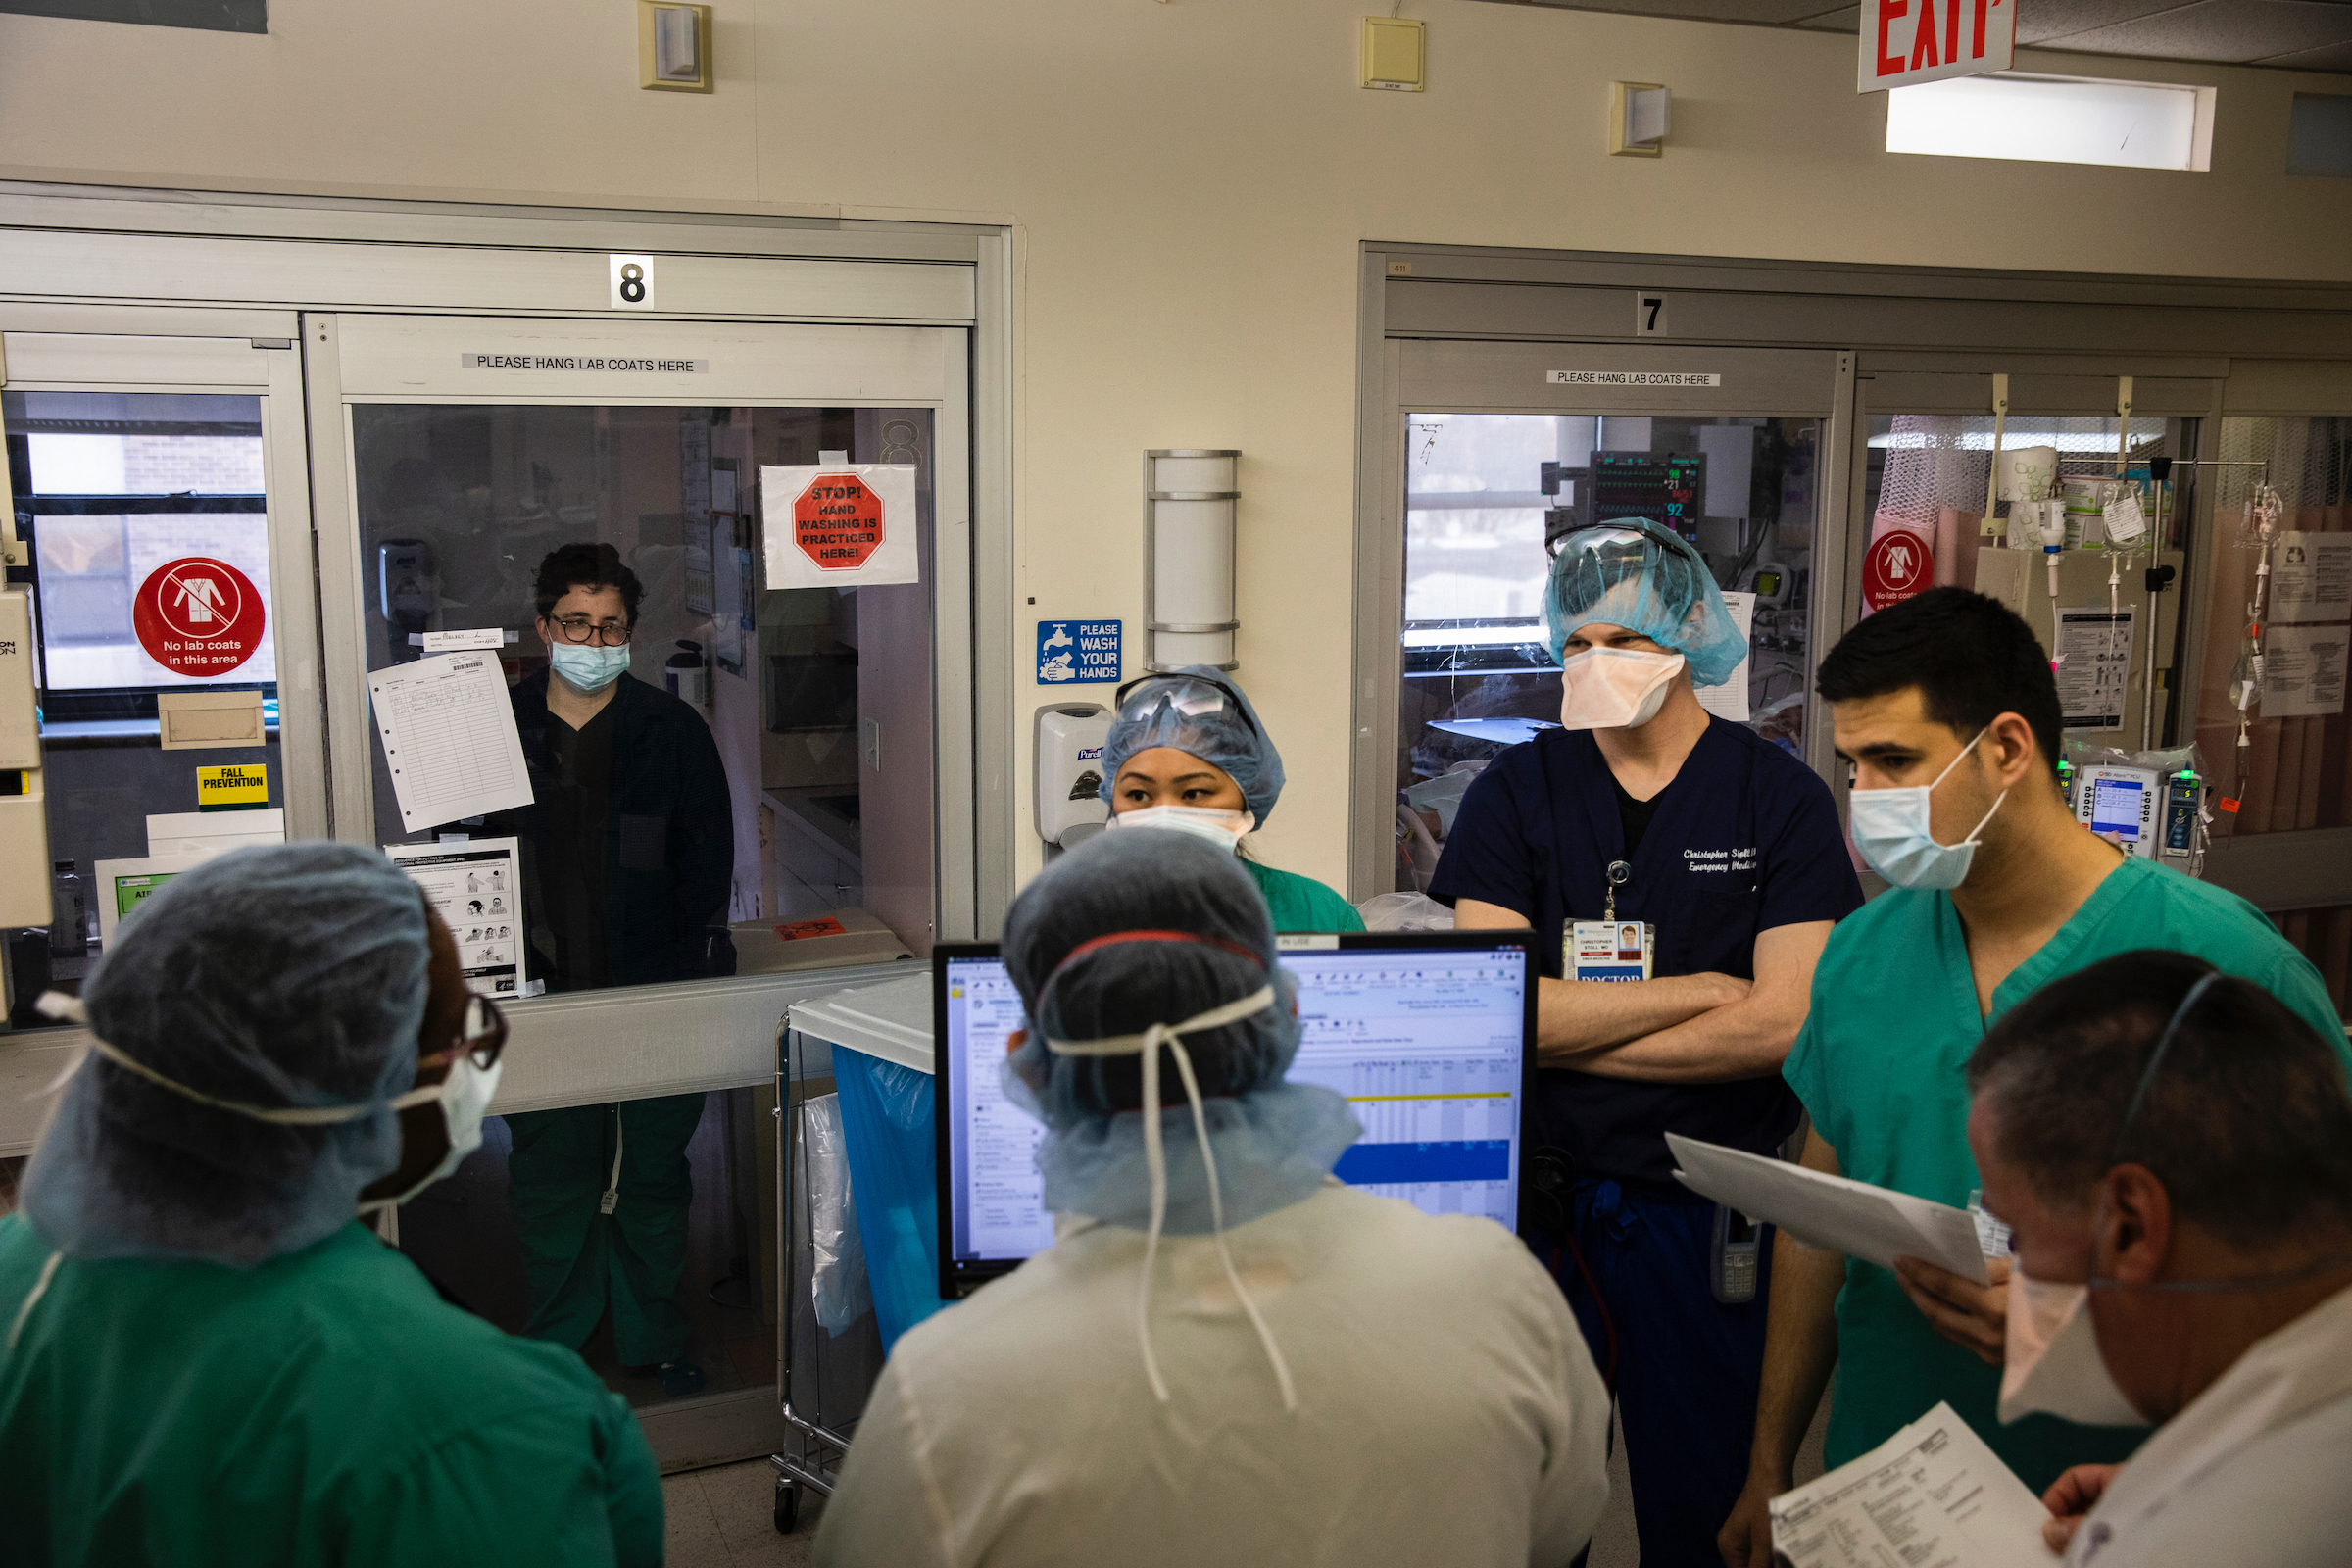 March 26th, 2020—Brooklyn, NY: Scenes from Maimonides Medical Center in Brooklyn, New York. The hospital is currently treating Covid-19 patients in their ER and ICU units, and are preparing for a bigger rush of potential patients. In the ICU—Dr. Laura Mulvey (33), an ER Physician at Maimonides, in her isolation unit after contracting Covid-19. She can be seen frame left while the ICU team holds a meeting in front of her unit. The team meeting was not intentionally held by her unit, it was just happenstance. She is a patient at this time and was not expected to listen.Photograph by Benjamin Norman for TIME